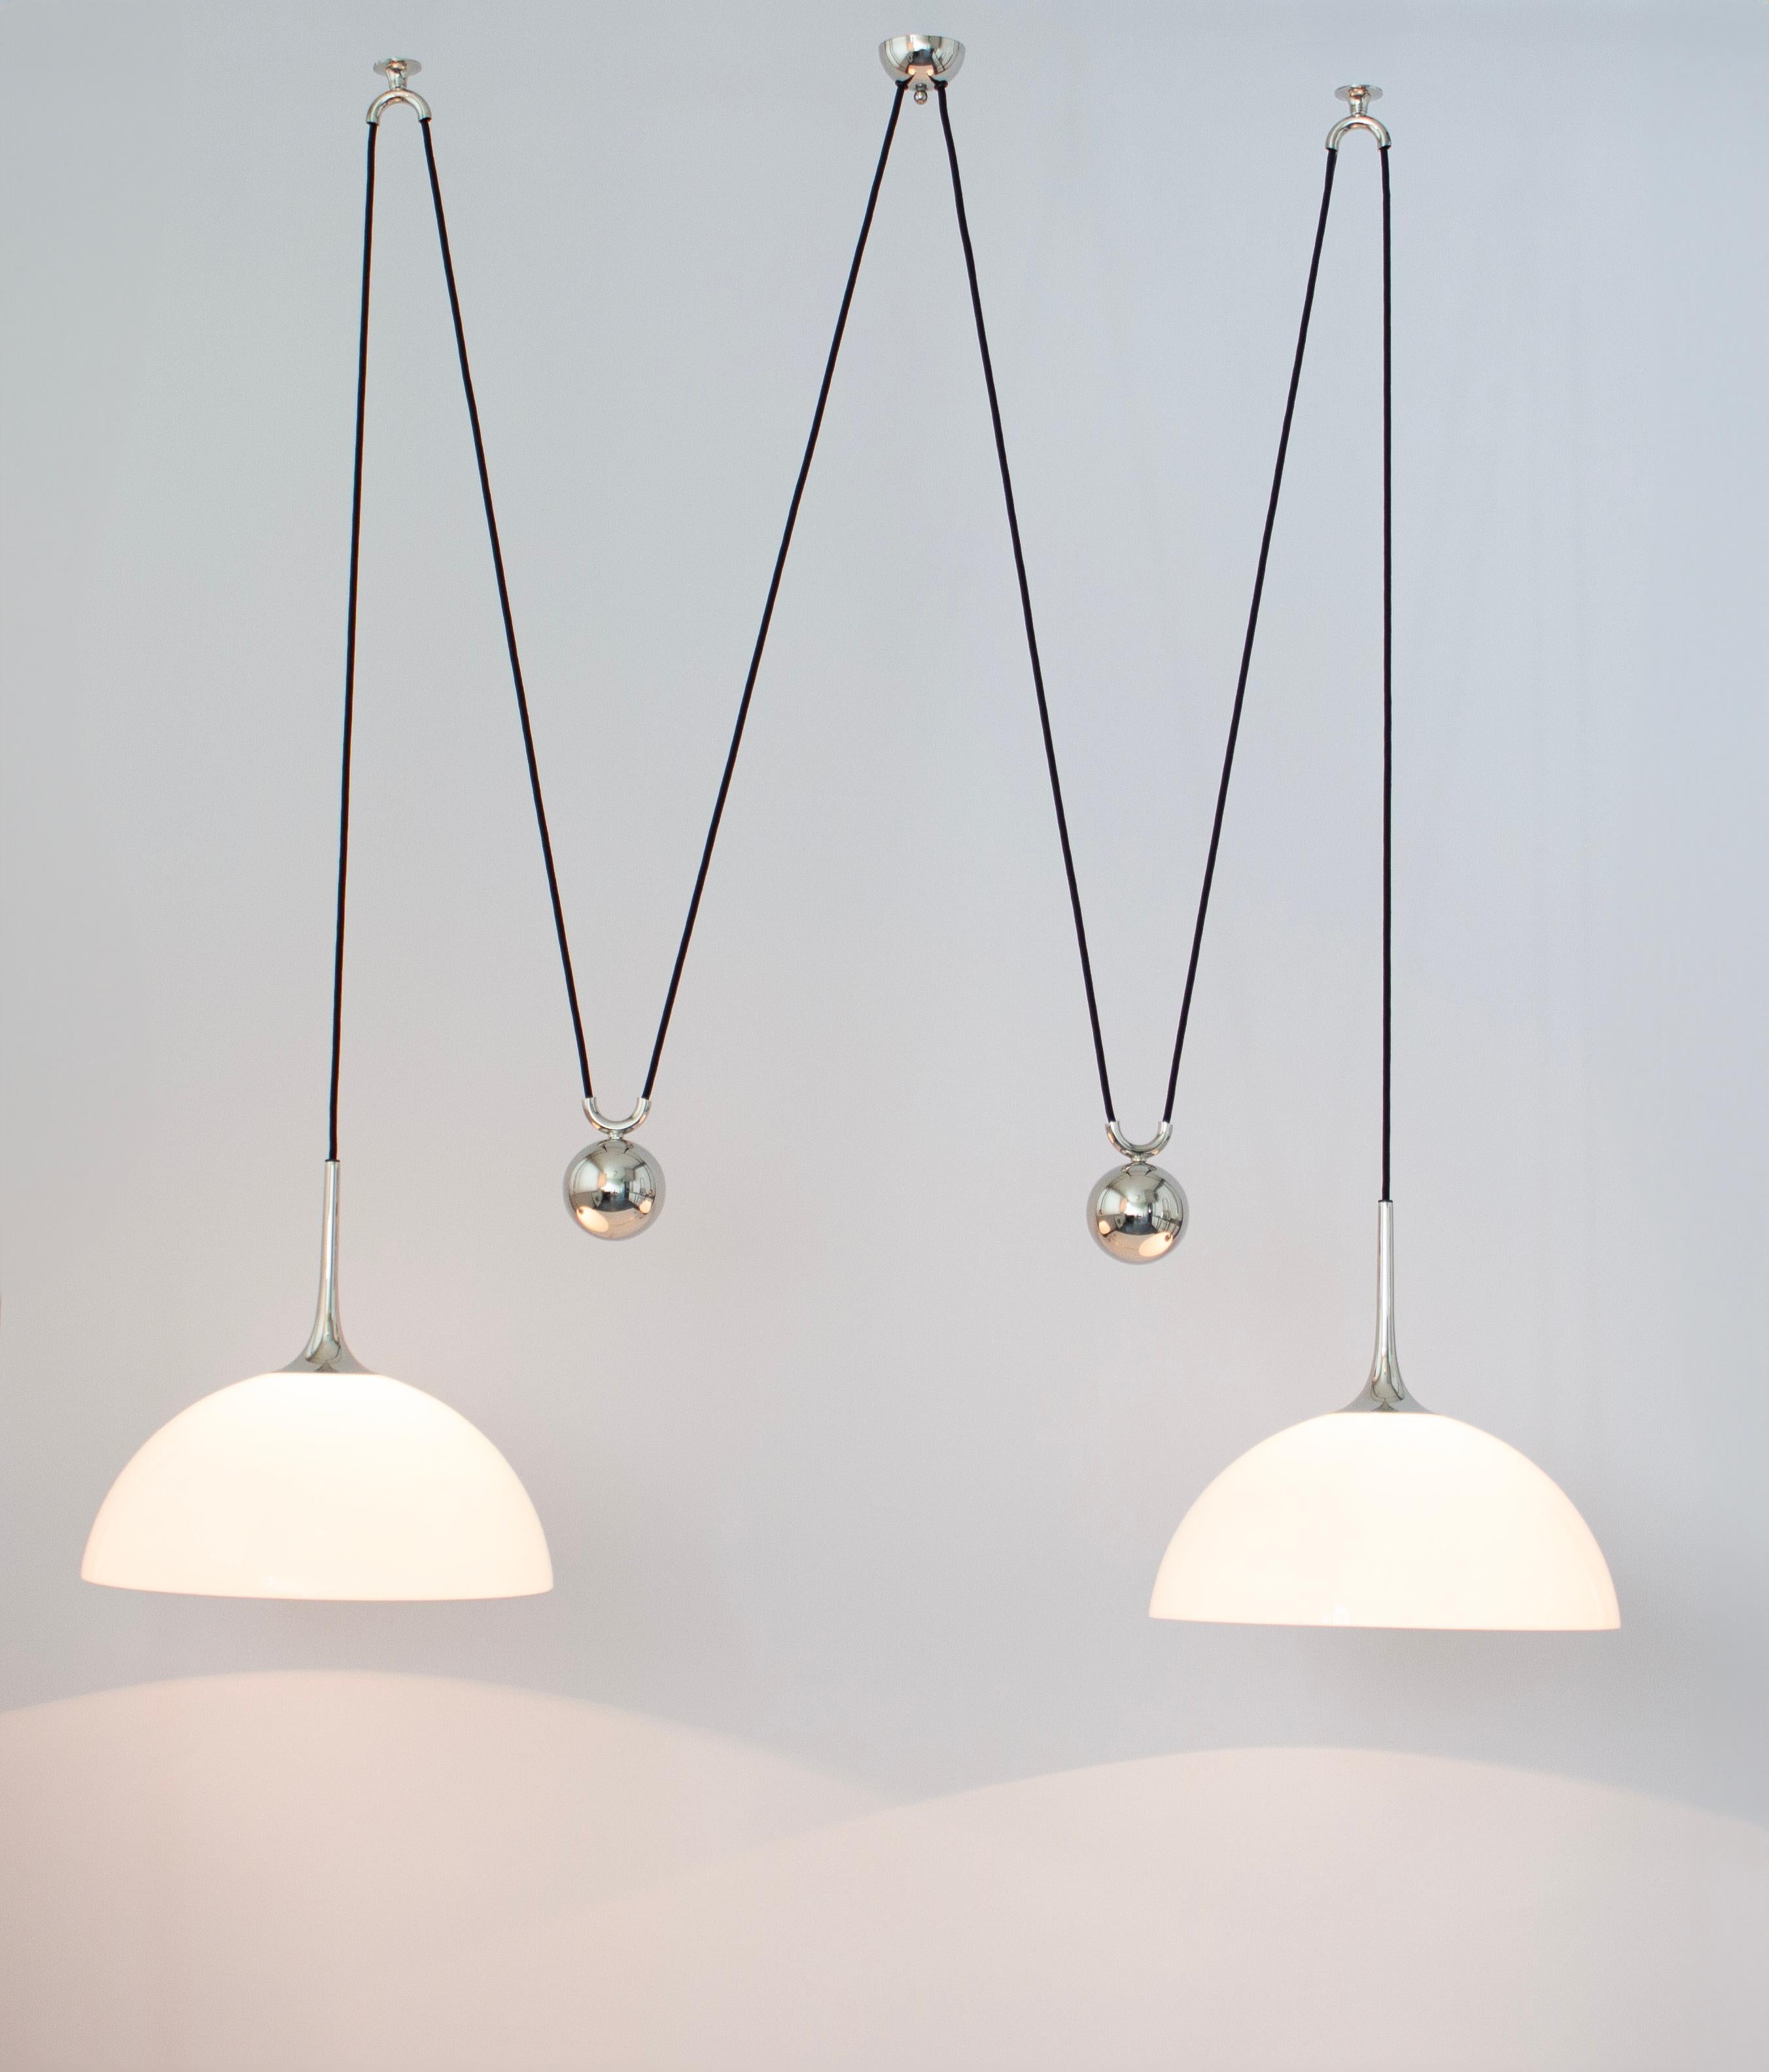 Stunning double Glass pendant with adjustable counterweights designed by Florian Schulz, Germany, 1970s

Two heavy metal ball counterweight and two Glass domes. Cloth cord.
Very vintage condition. Height is adjustable.
Sockets: 2 x E26/E27 standard